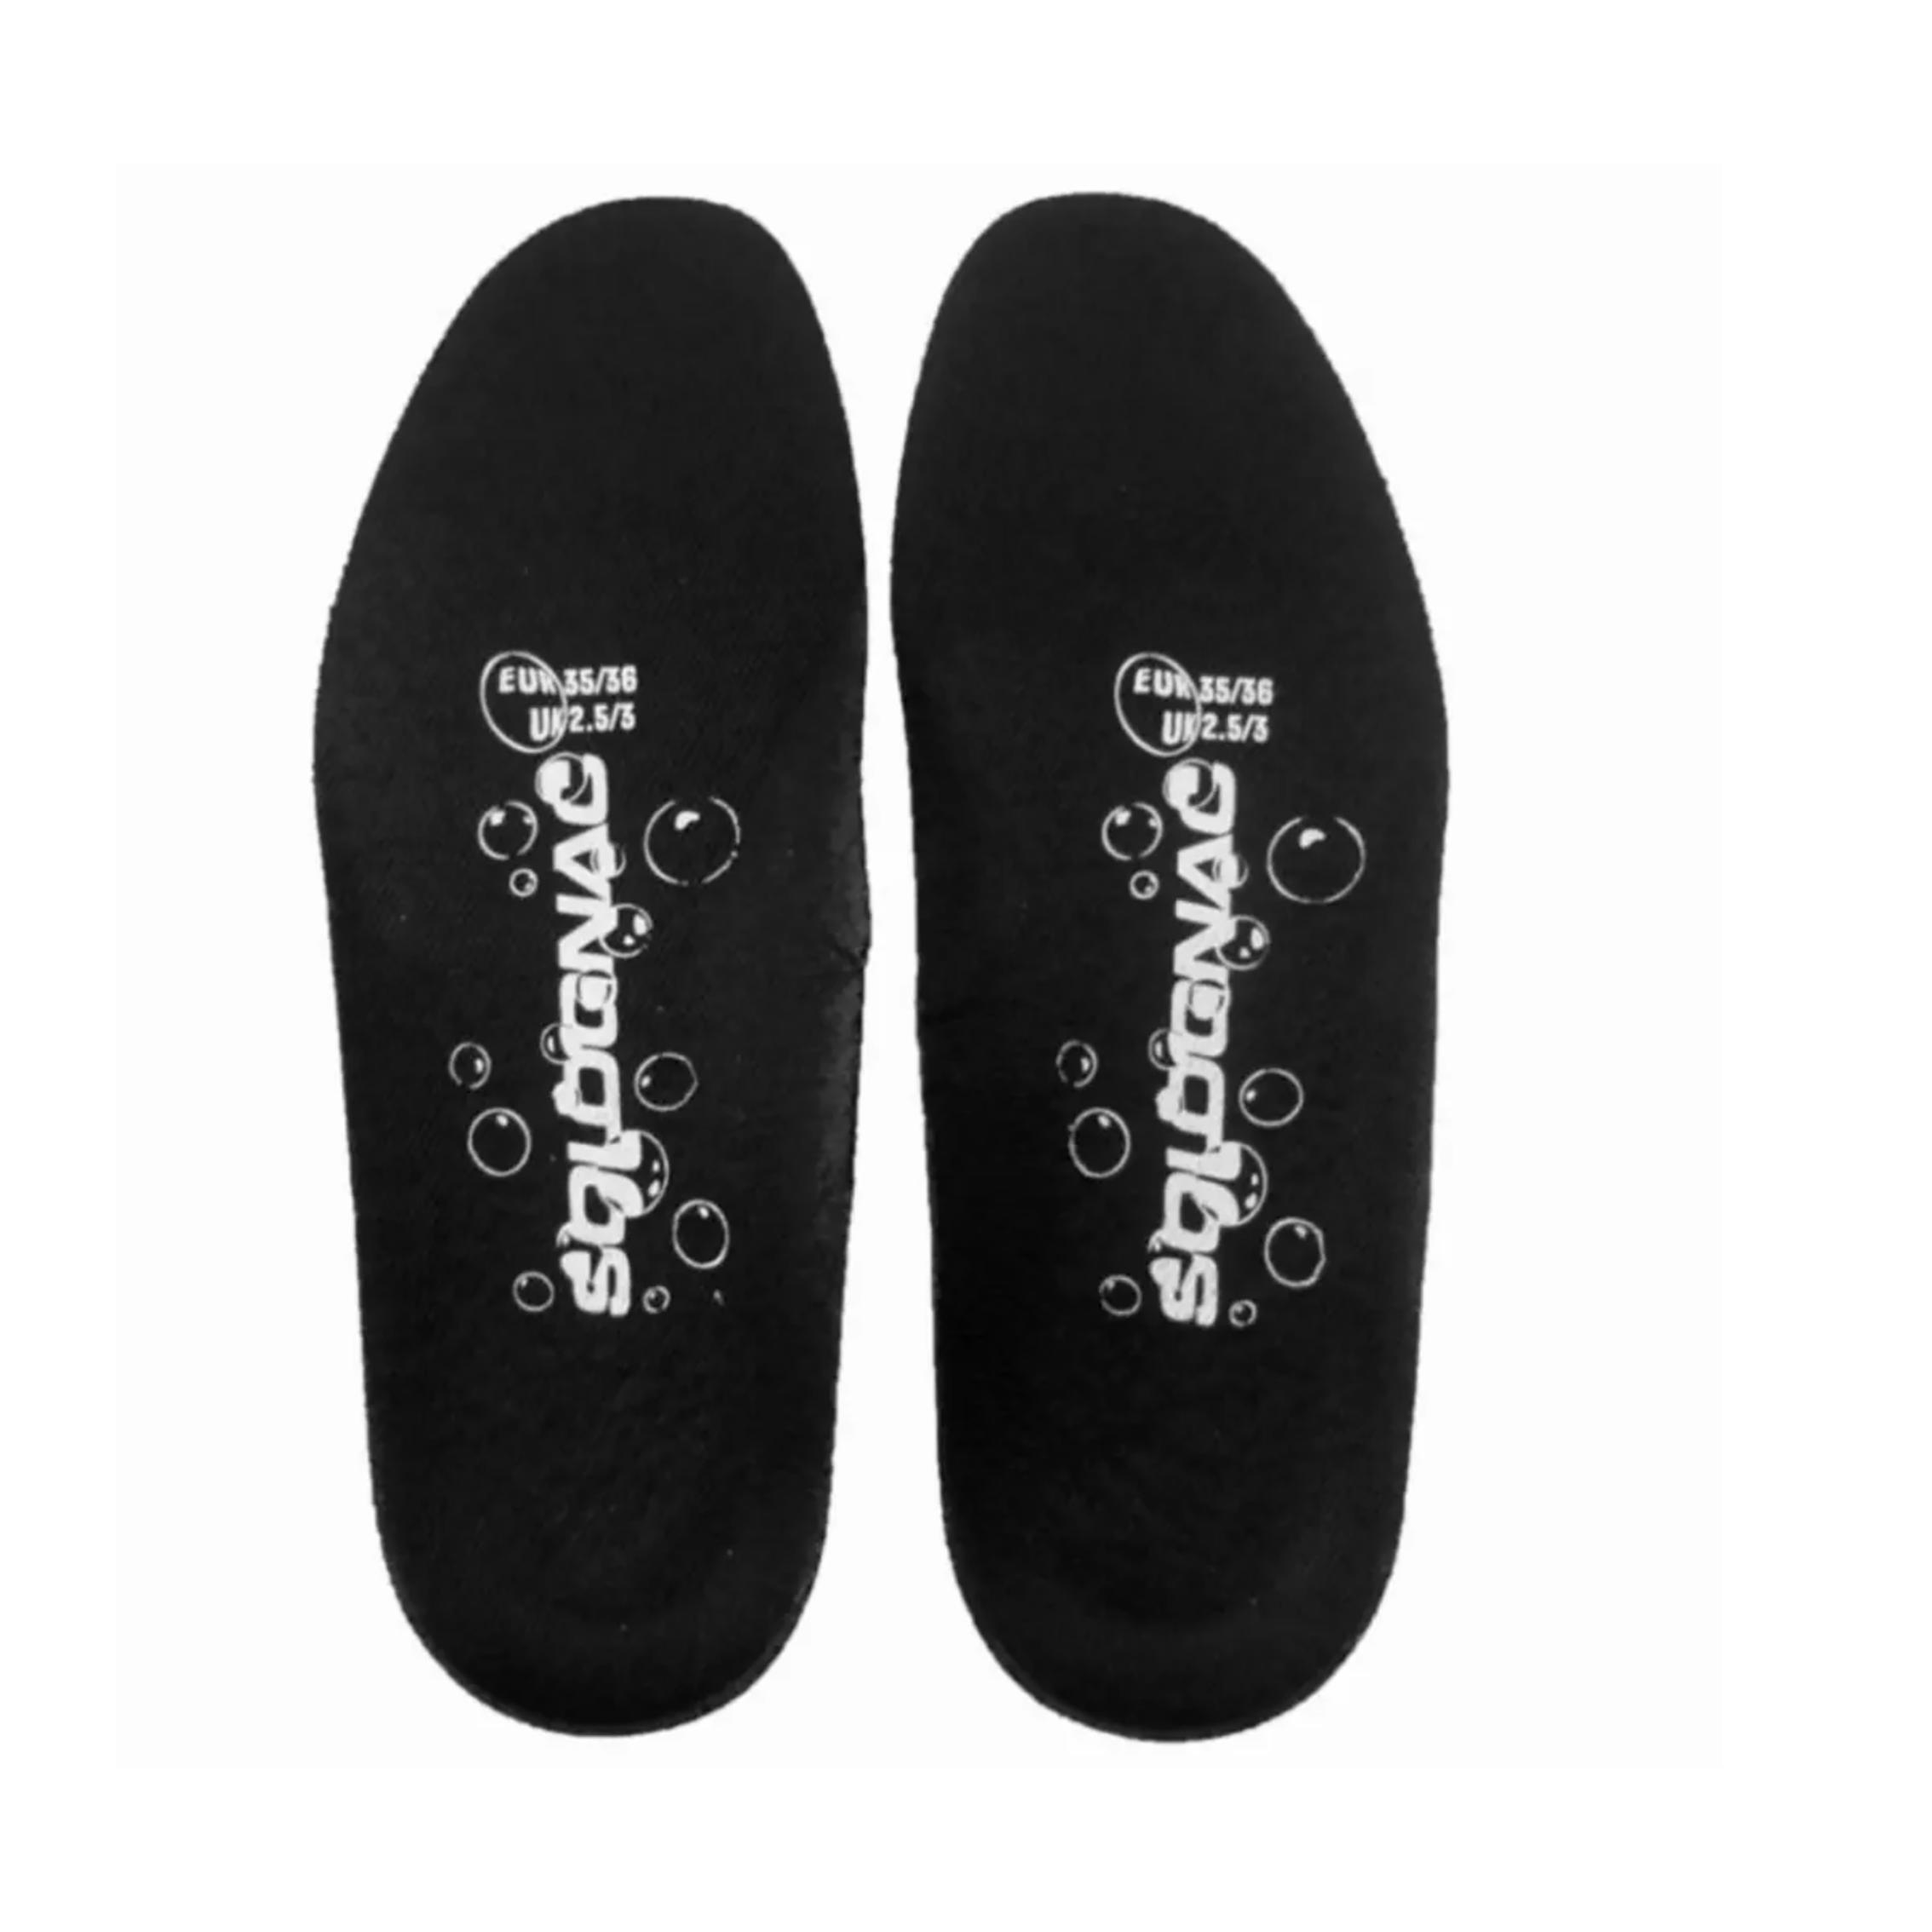 Solognac Insoles For Wellies - Black